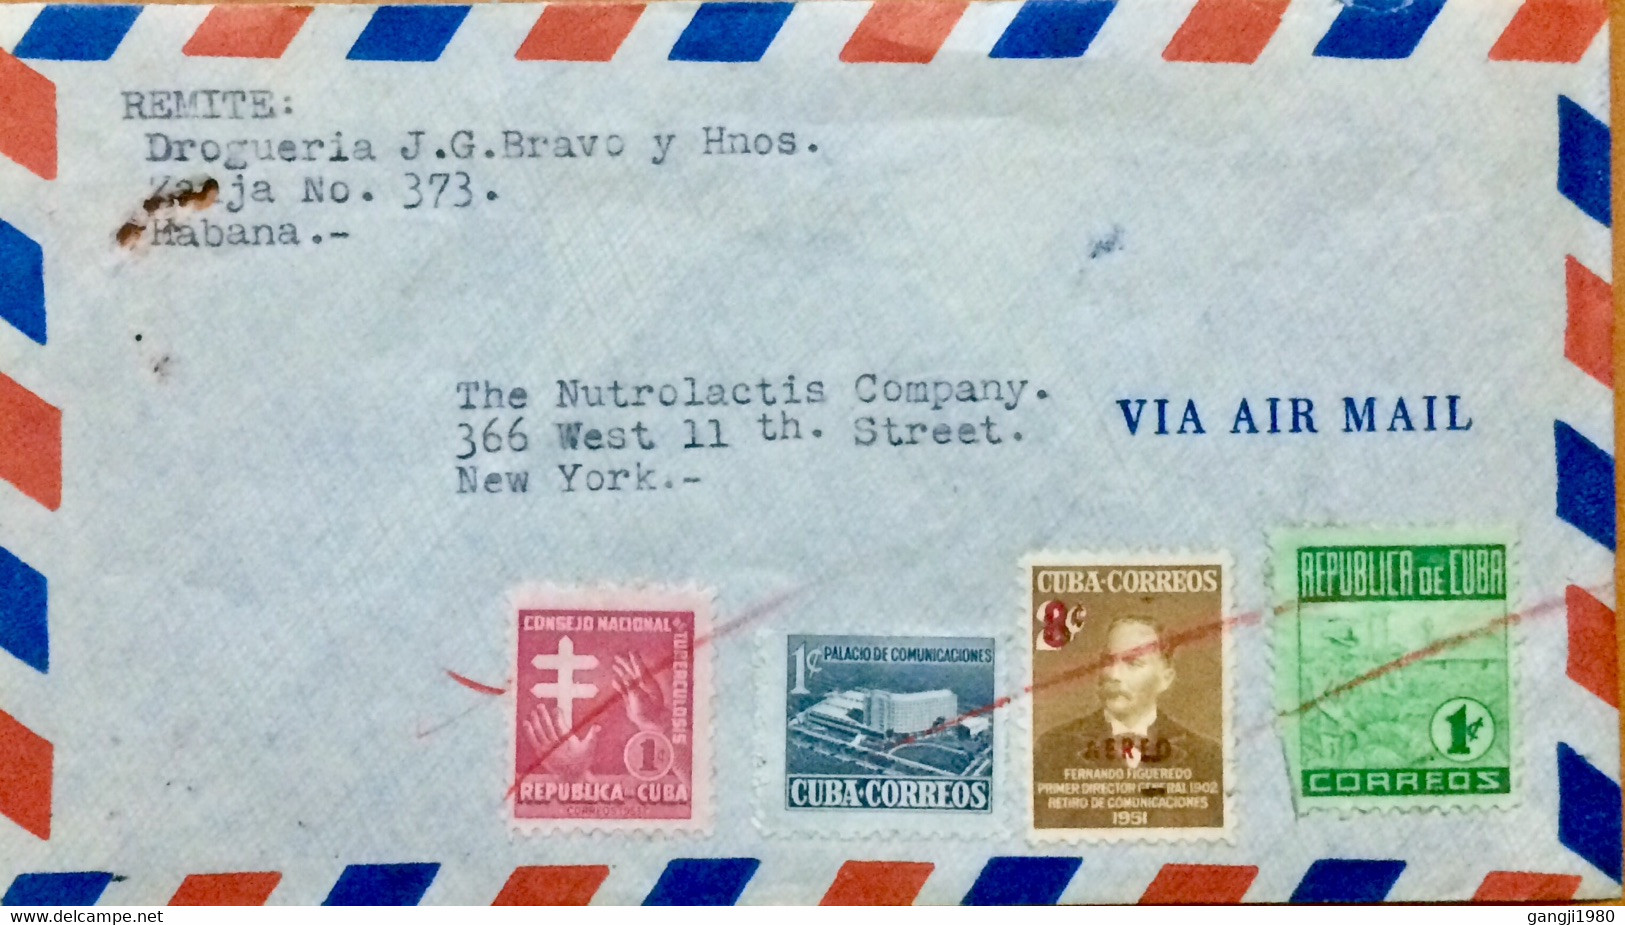 CUBA 1952, COVER USED TO USA, F.FIGUEREDO STAMP OVPTD, POST BUILDING, TOBACCO, TUBERCULOSIS, NEW YORK, OLD CHELSEA STATI - Lettres & Documents